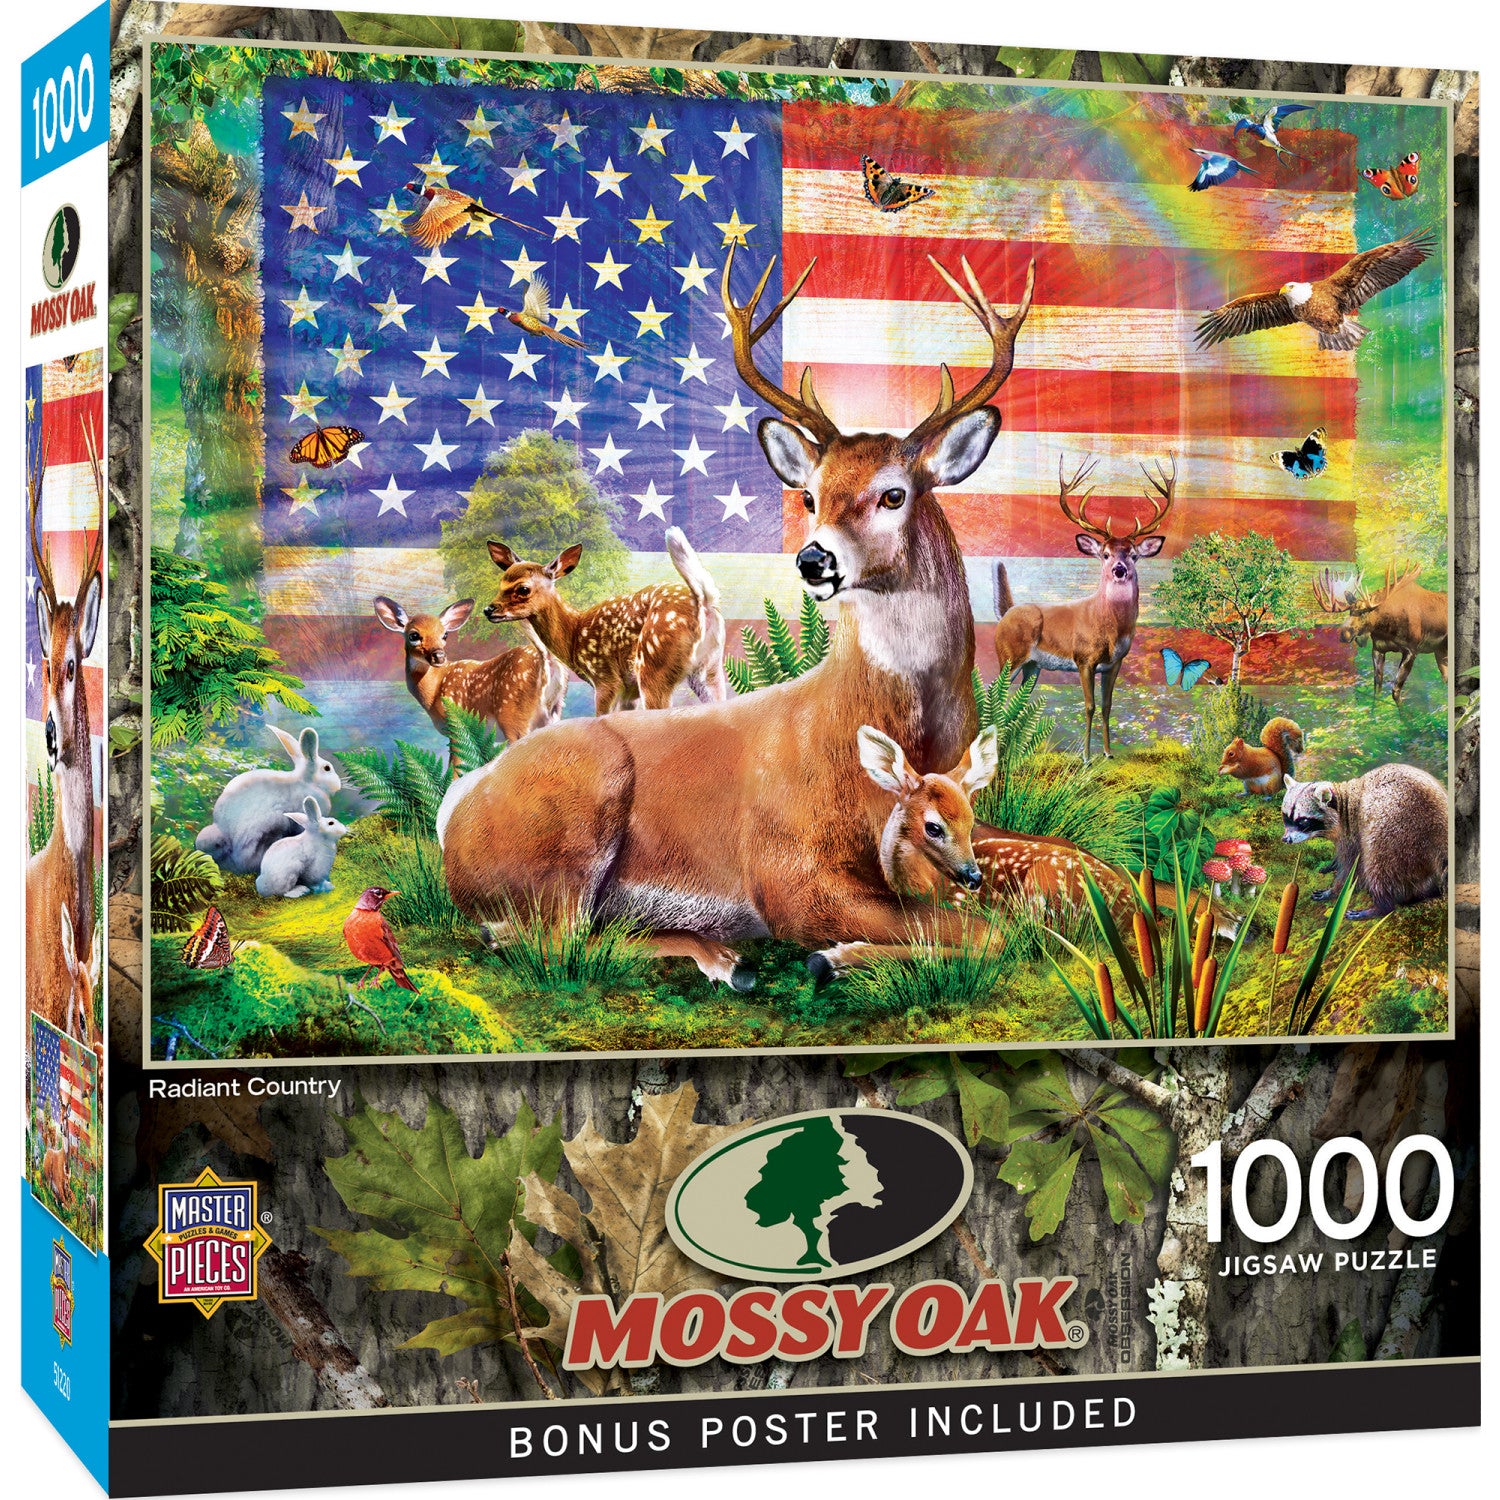 MasterPieces REALTREE Gone Fishing 1000 Piece Puzzle (Open Box)